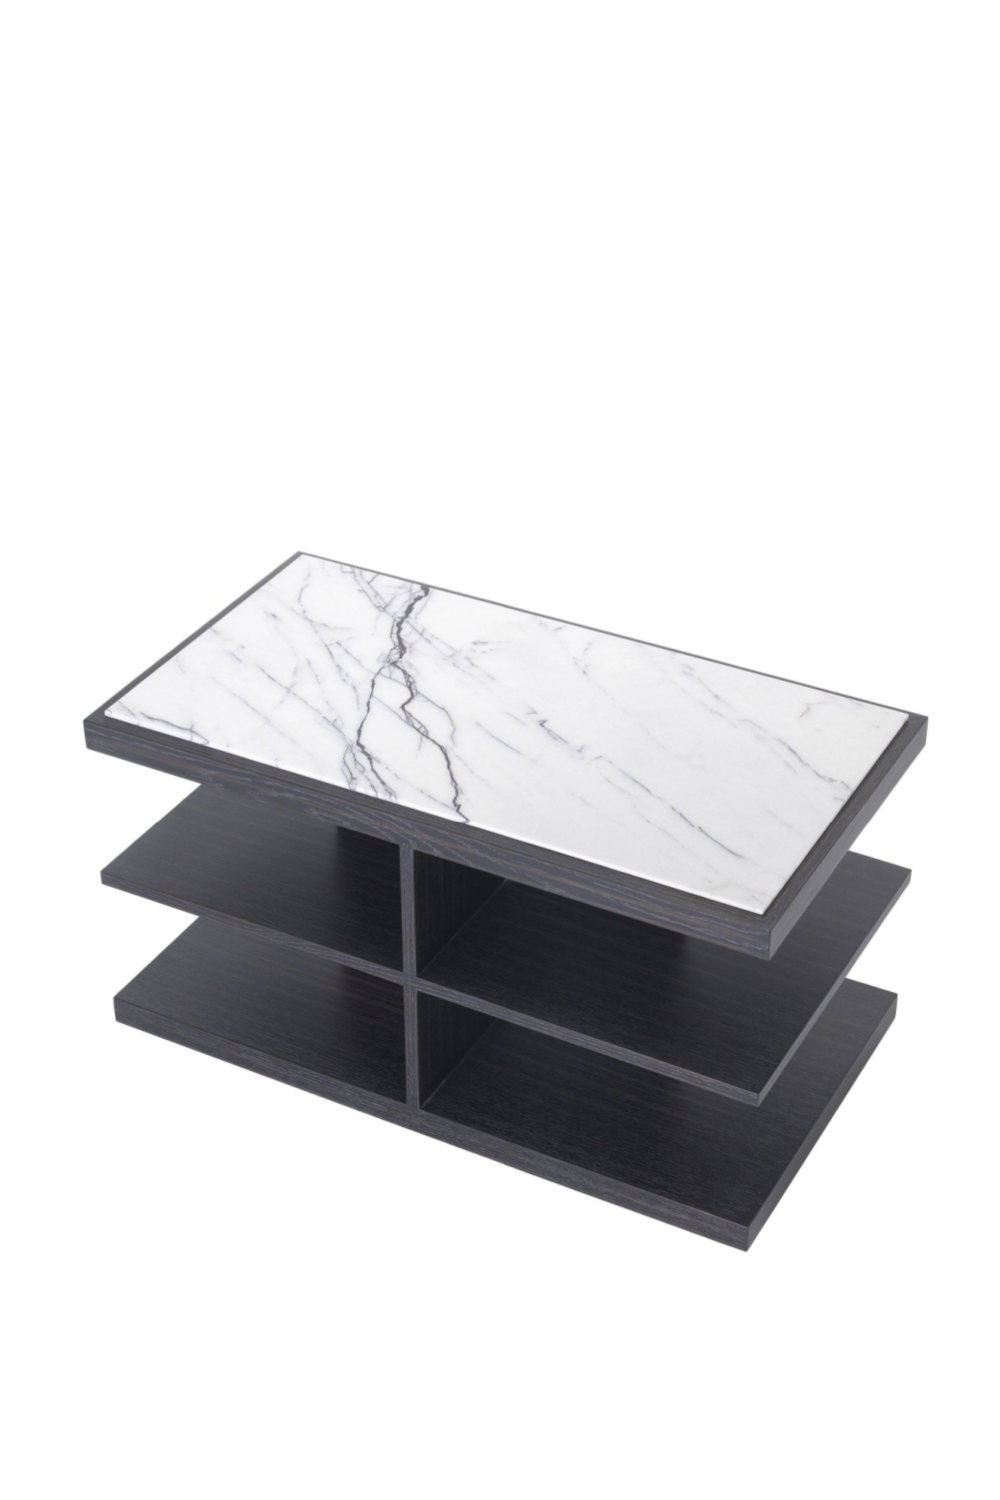 Wooden Marble Top Side Table | Eichholtz Miguel | Oroa.com